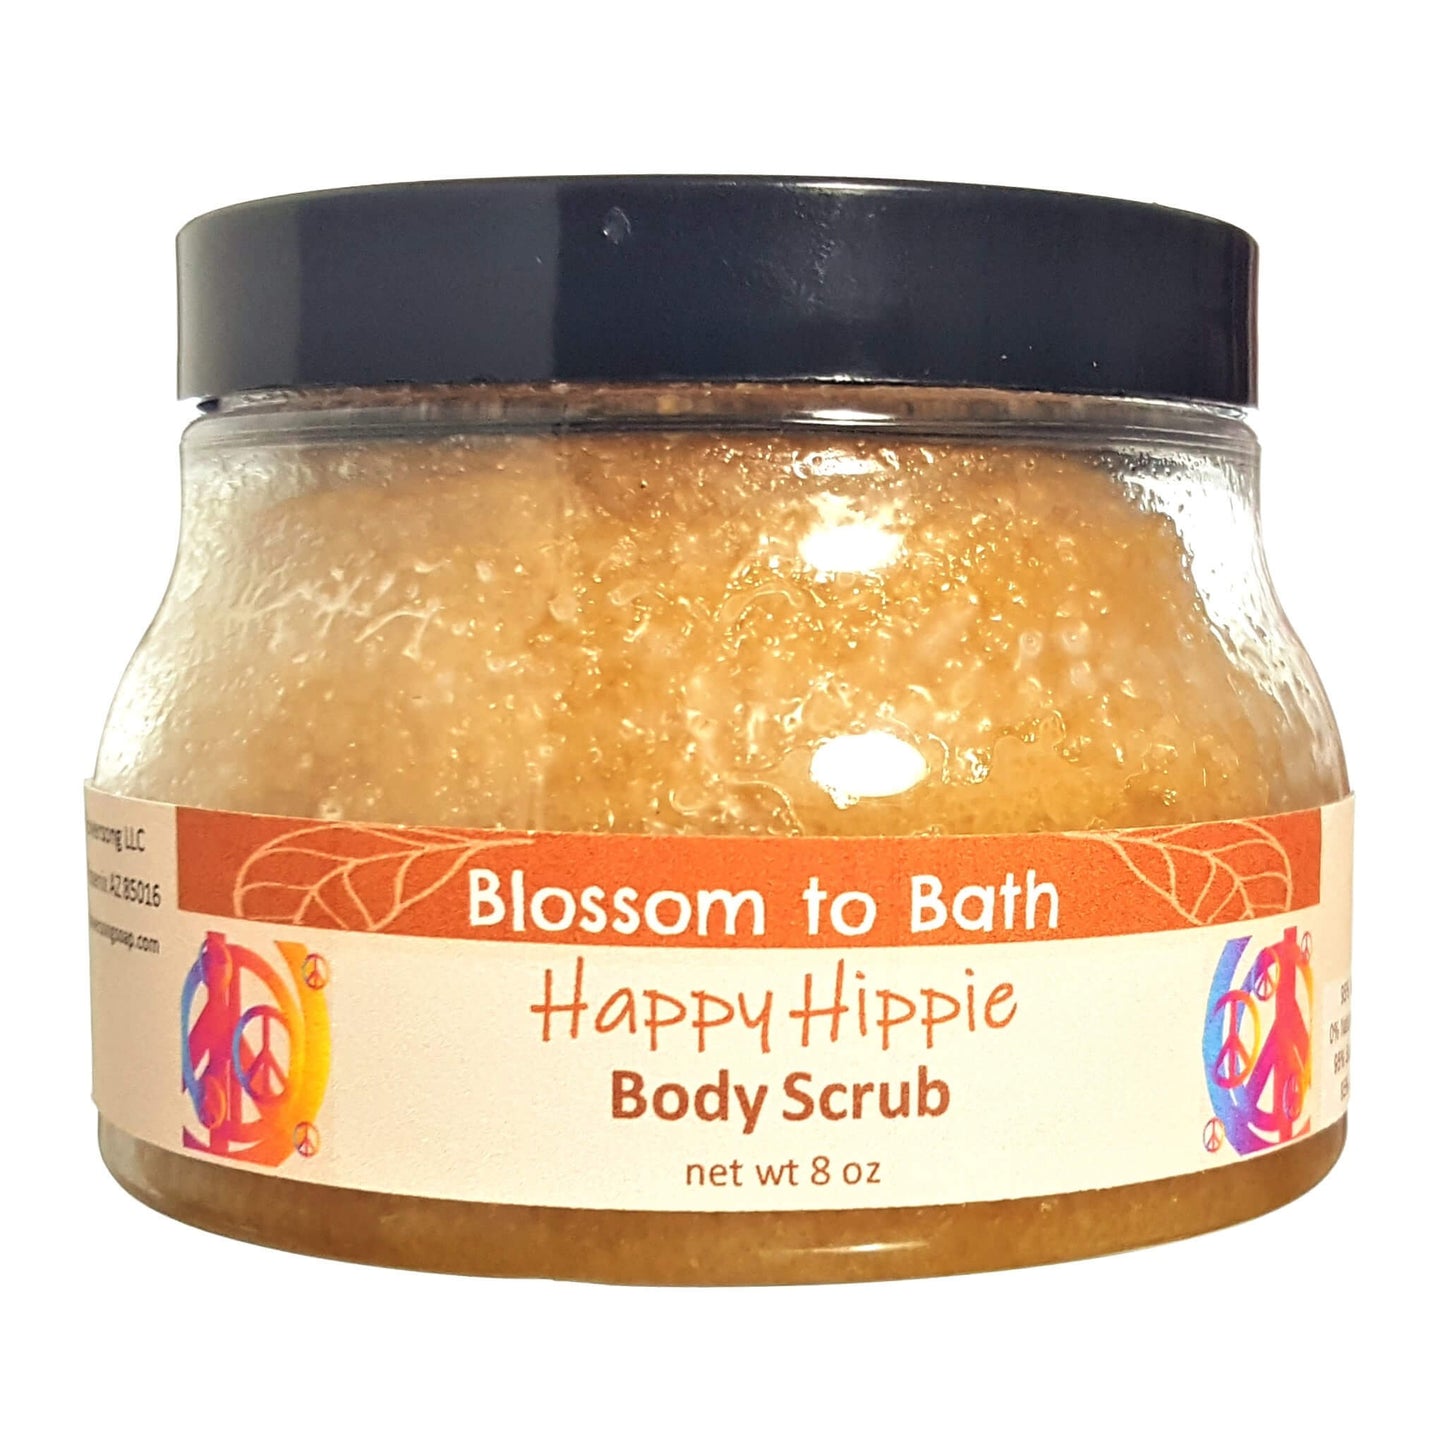 Buy Blossom to Bath Happy Hippie Body Scrub from Flowersong Soap Studio.  Large crystal turbinado sugar plus luxury rich oils conveniently exfoliate and moisturize in one step  A refreshing herbal fragrance that elevates your mood and your perspective.